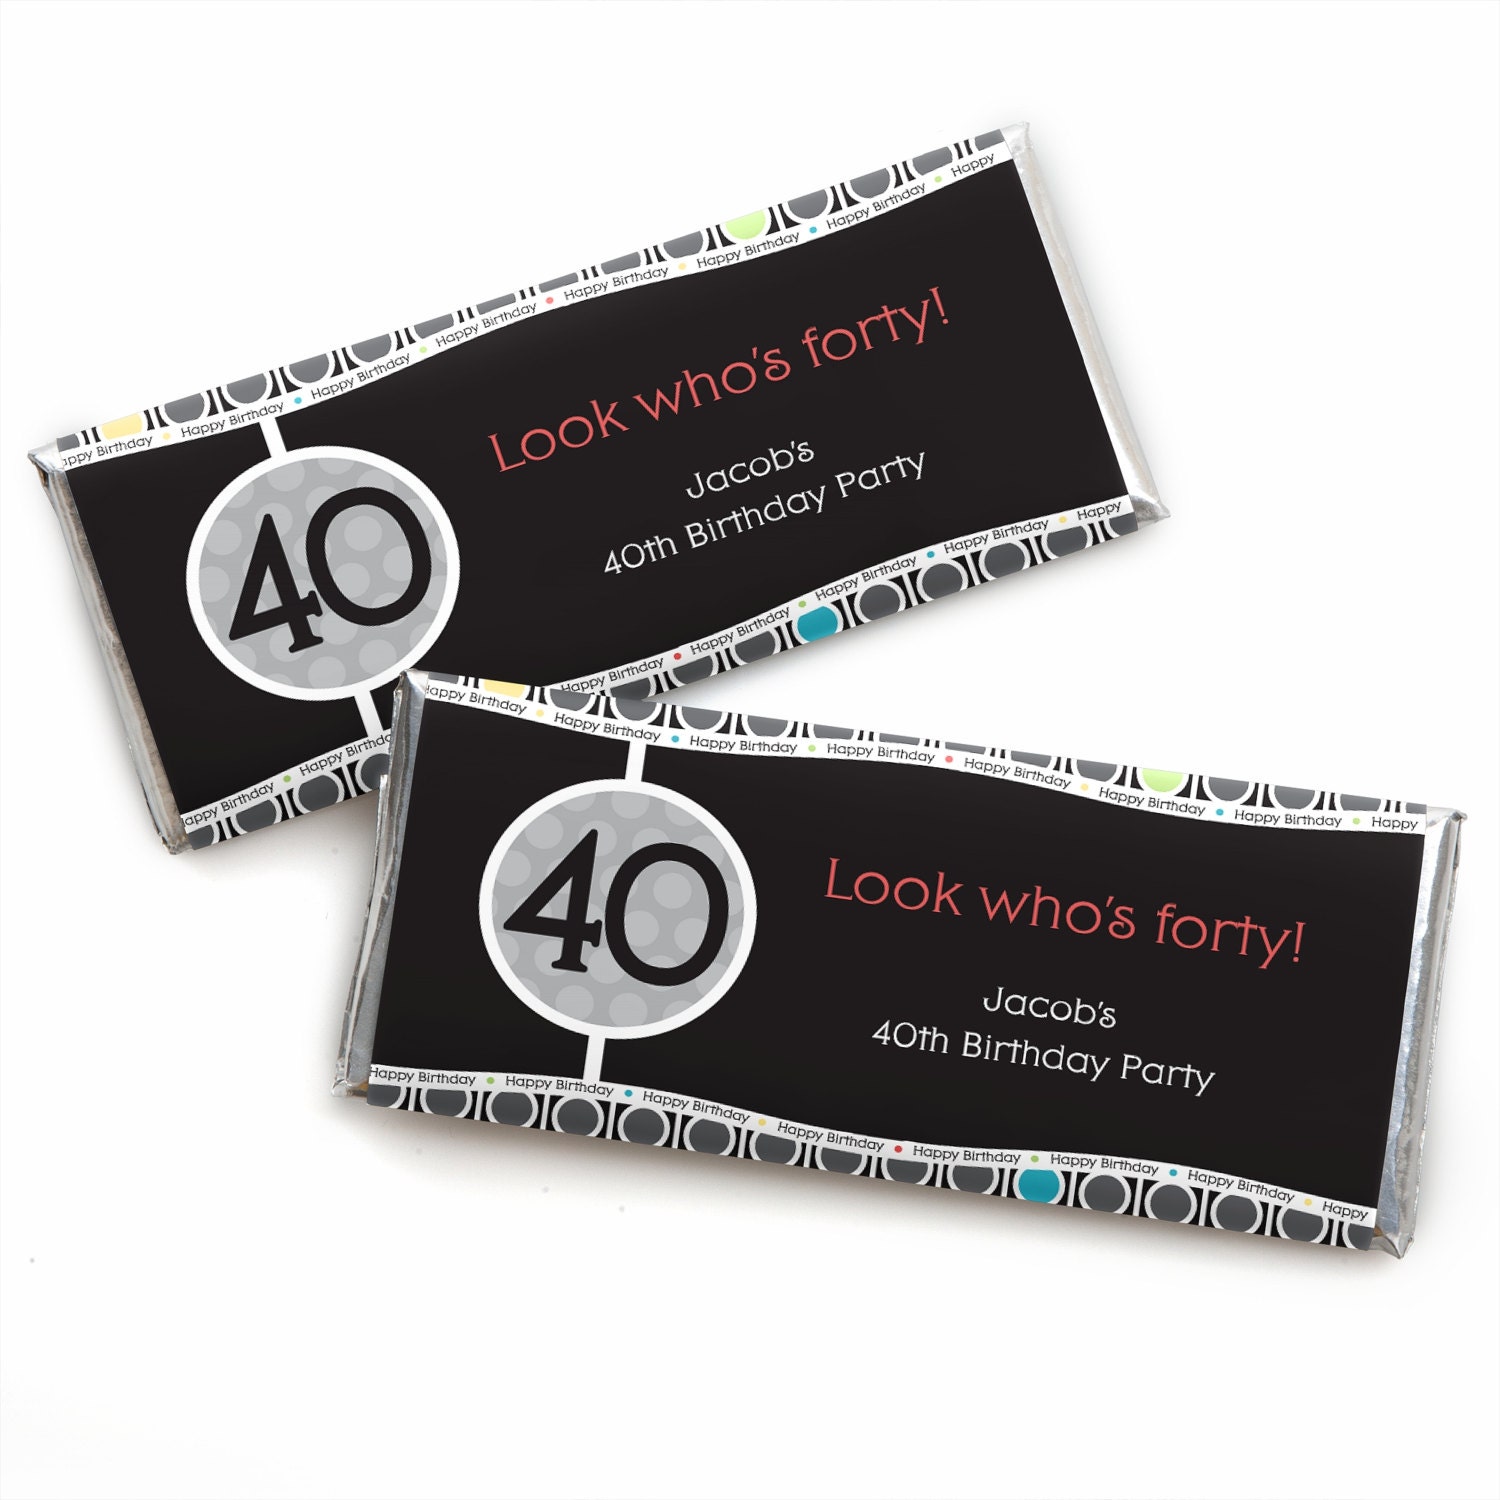 personalized candy bar wrappers for birthday